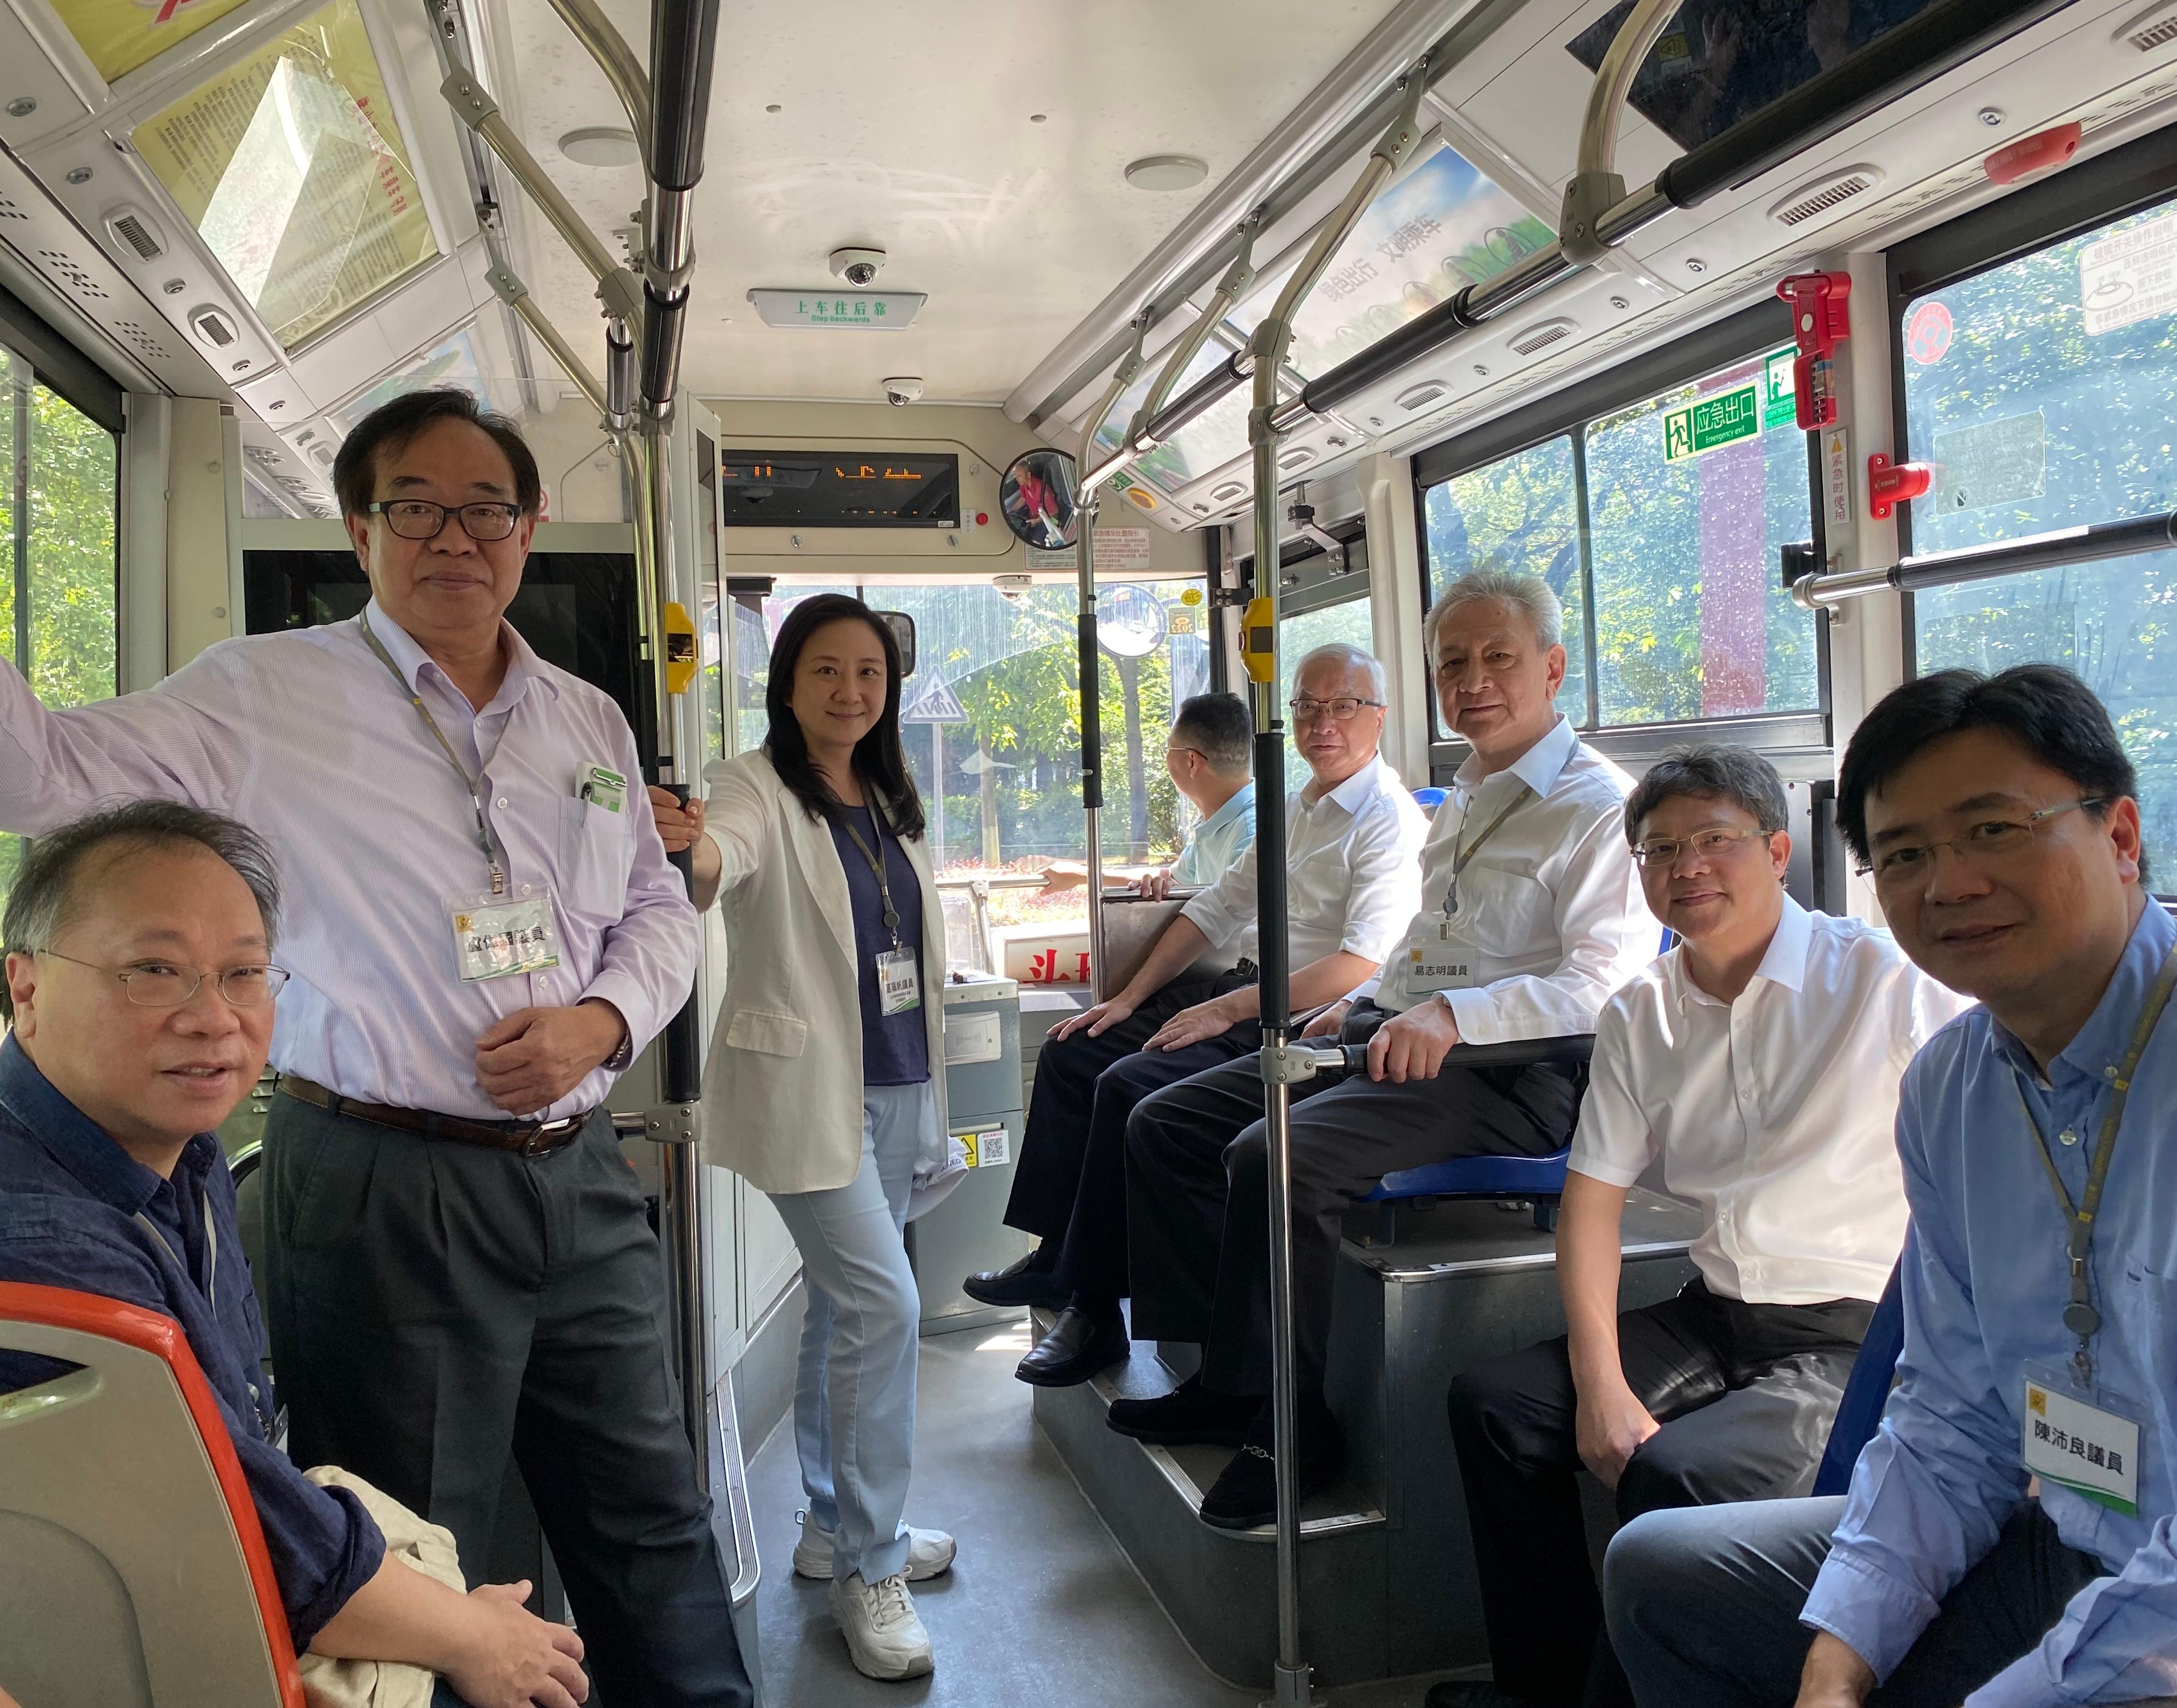 The Secretary for Environment and Ecology, Mr Tse Chin-wan, together with the Legislative Council Panel on Environmental Affairs, today (August 8) visited the Nanhai Hydrogen Center in Foshan in the morning. They received a briefing from a representative on the planning and achievements of hydrogen energy development in Foshan to learn more about the development and application of hydrogen energy in the Mainland.  Photo shows Mr Tse (fourth right) and the delegation of the Legislative Council Panel on Environmental Affairs, riding on a hydrogen fuel cell bus.